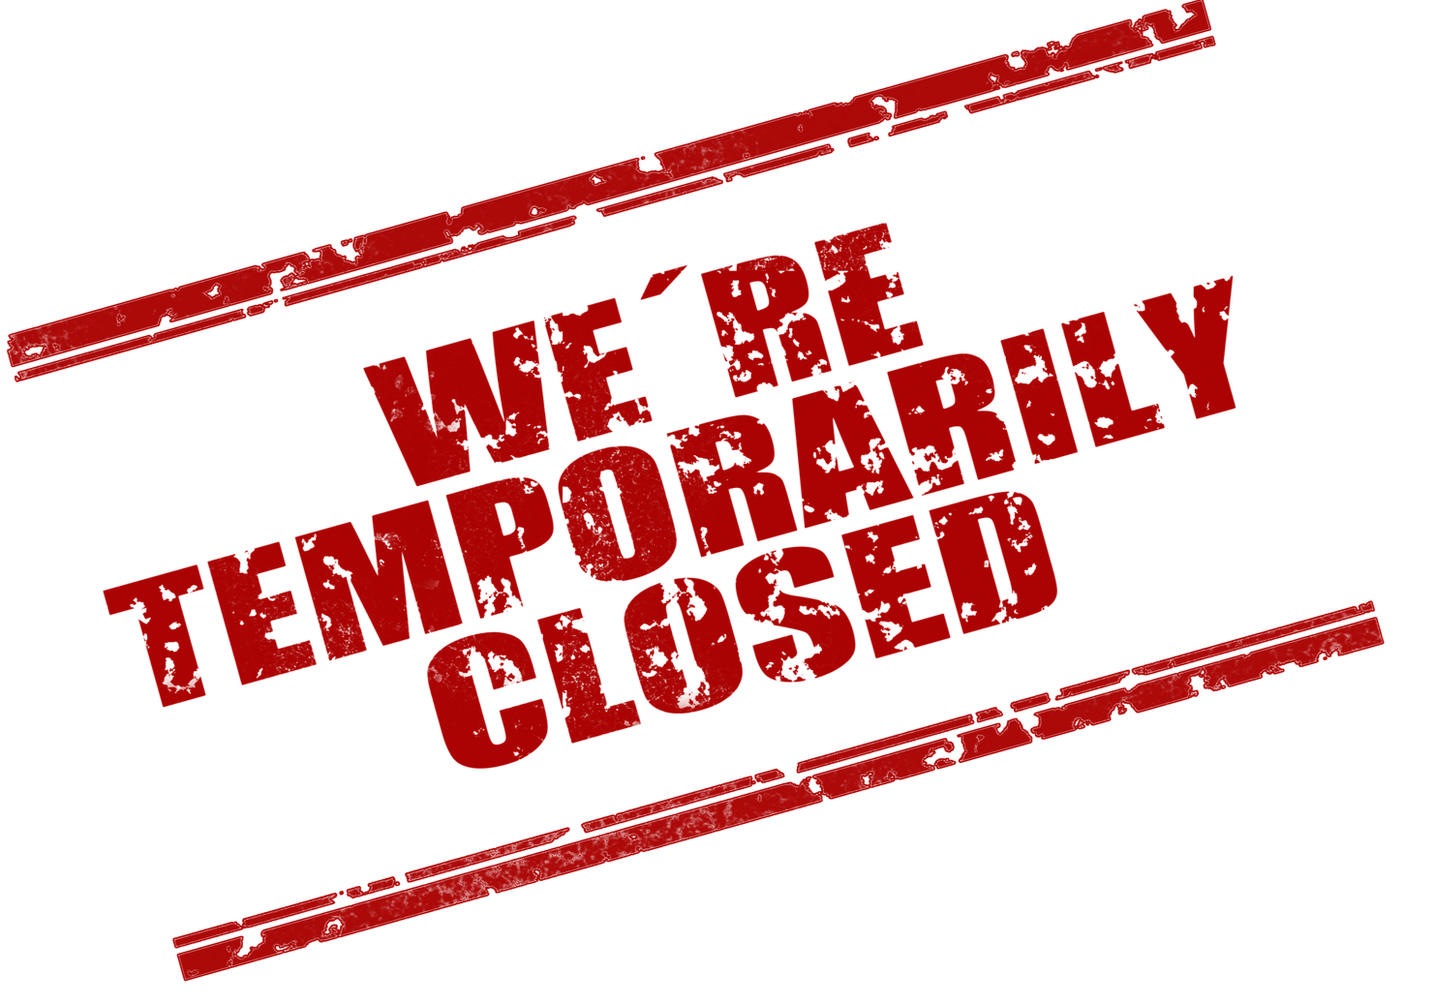 We're Temporarily Closed